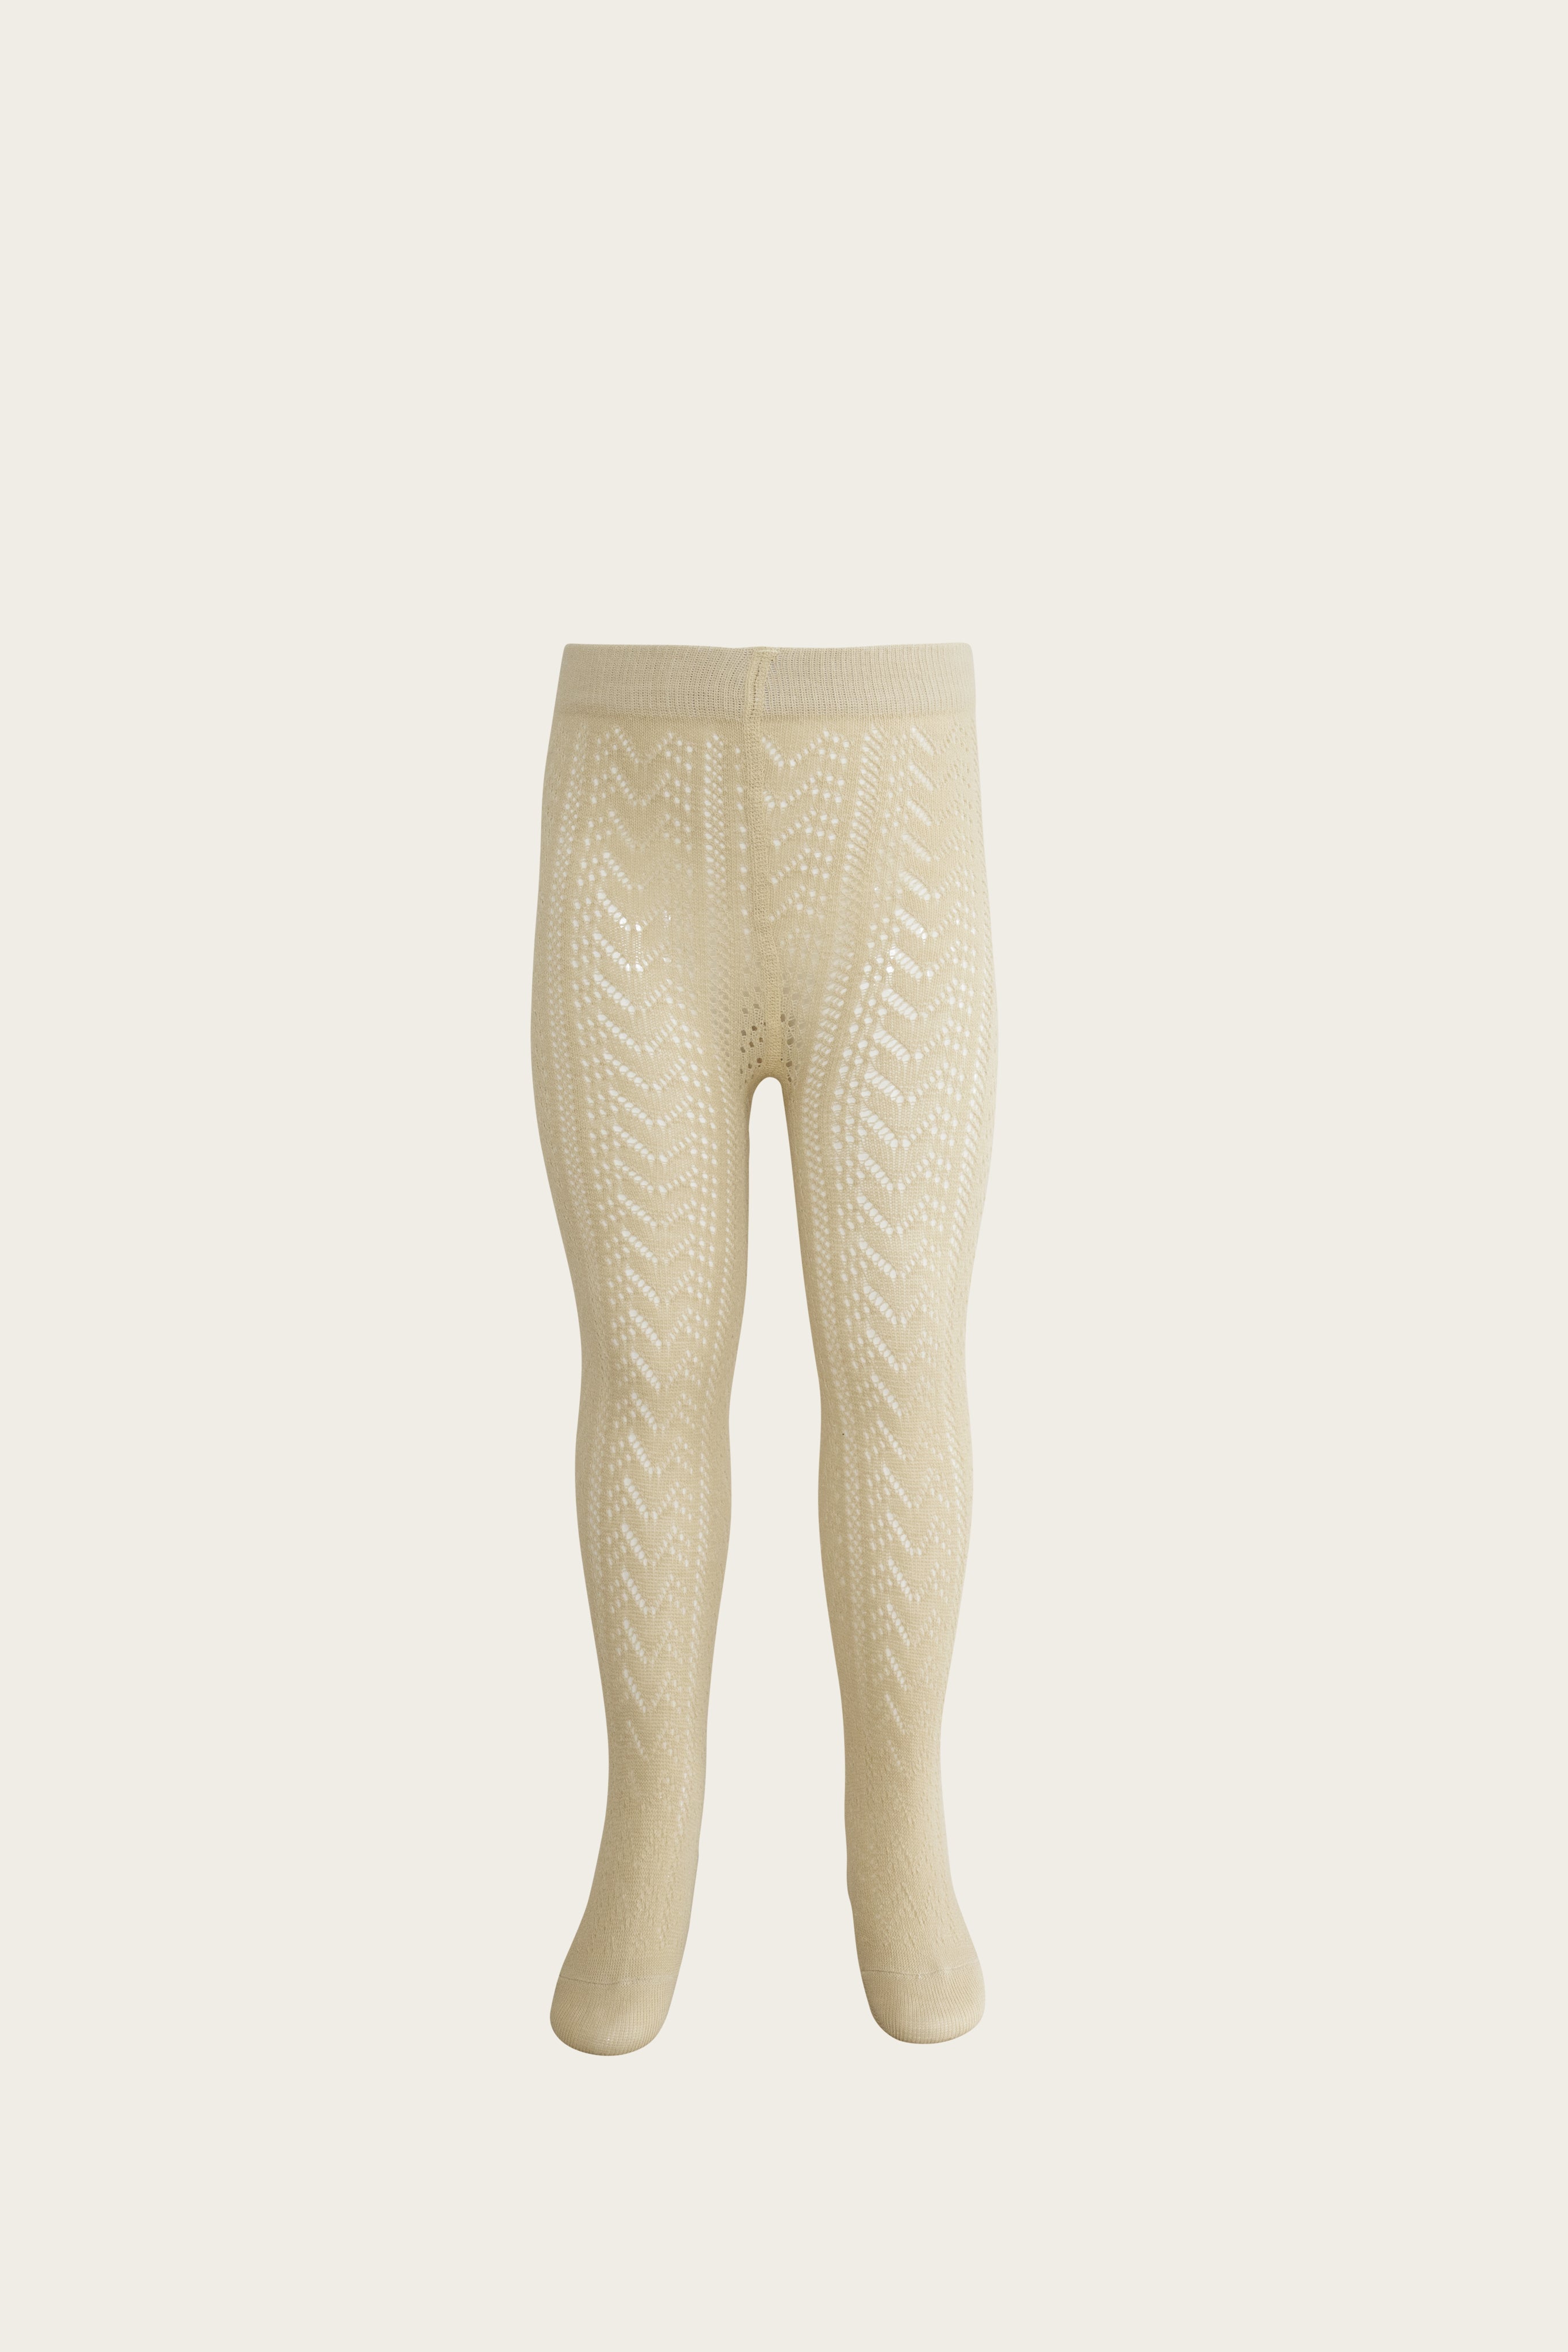 Cable Weave Tights - Sandstone-Clothing & Accessories-Jamie Kay-The Bay Room